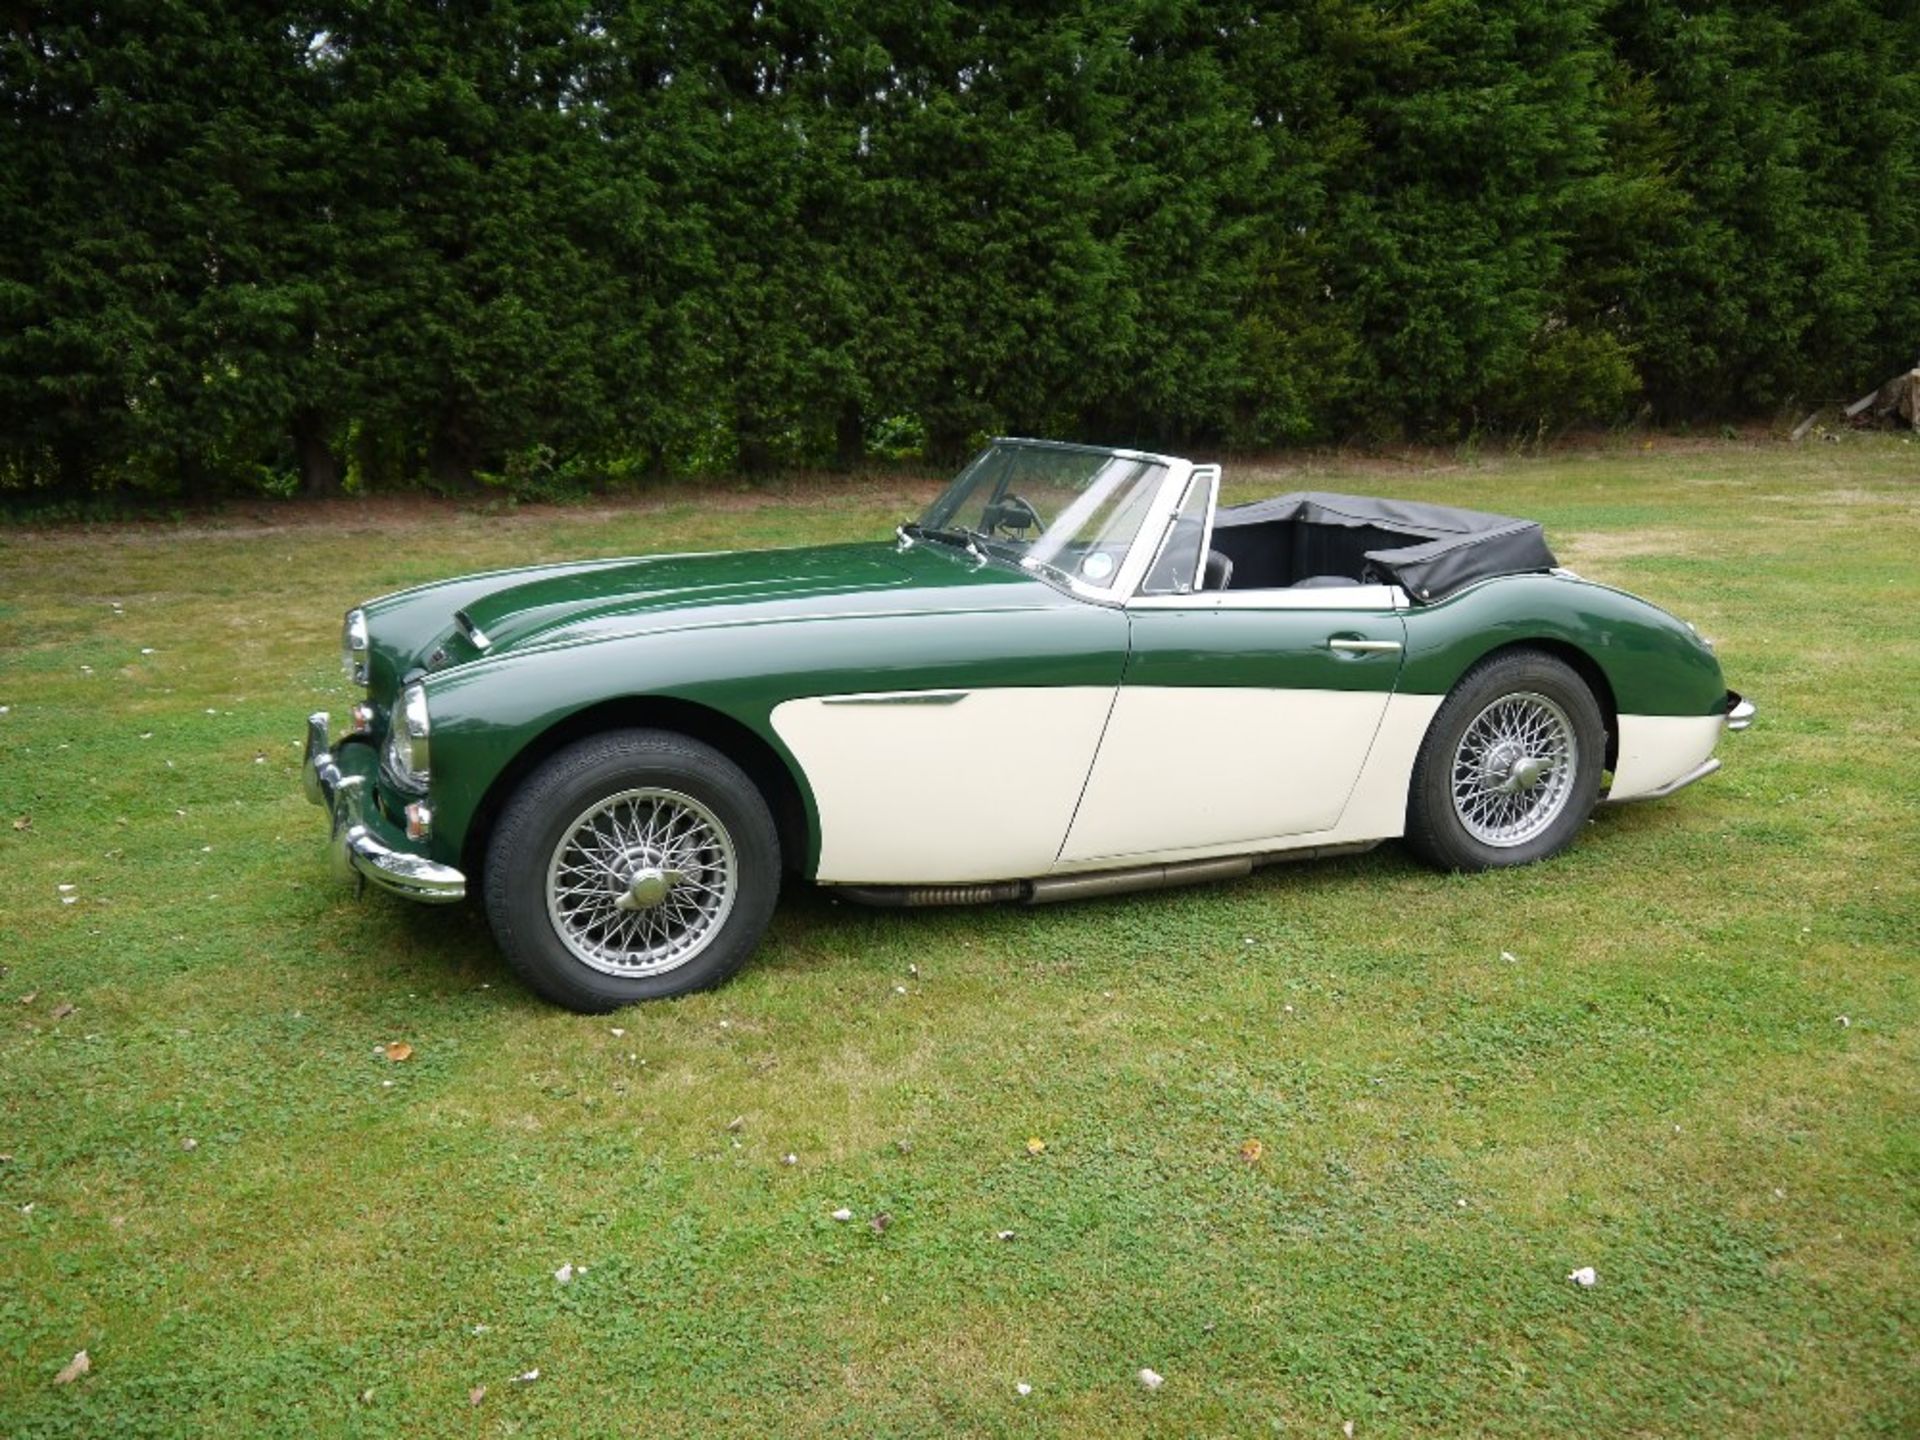 1963 AUSTIN-HEALEY 3000 MARK II Registration Number: MJF 346 Chassis Number: H-BJ7-24376 Recorded - Image 4 of 22